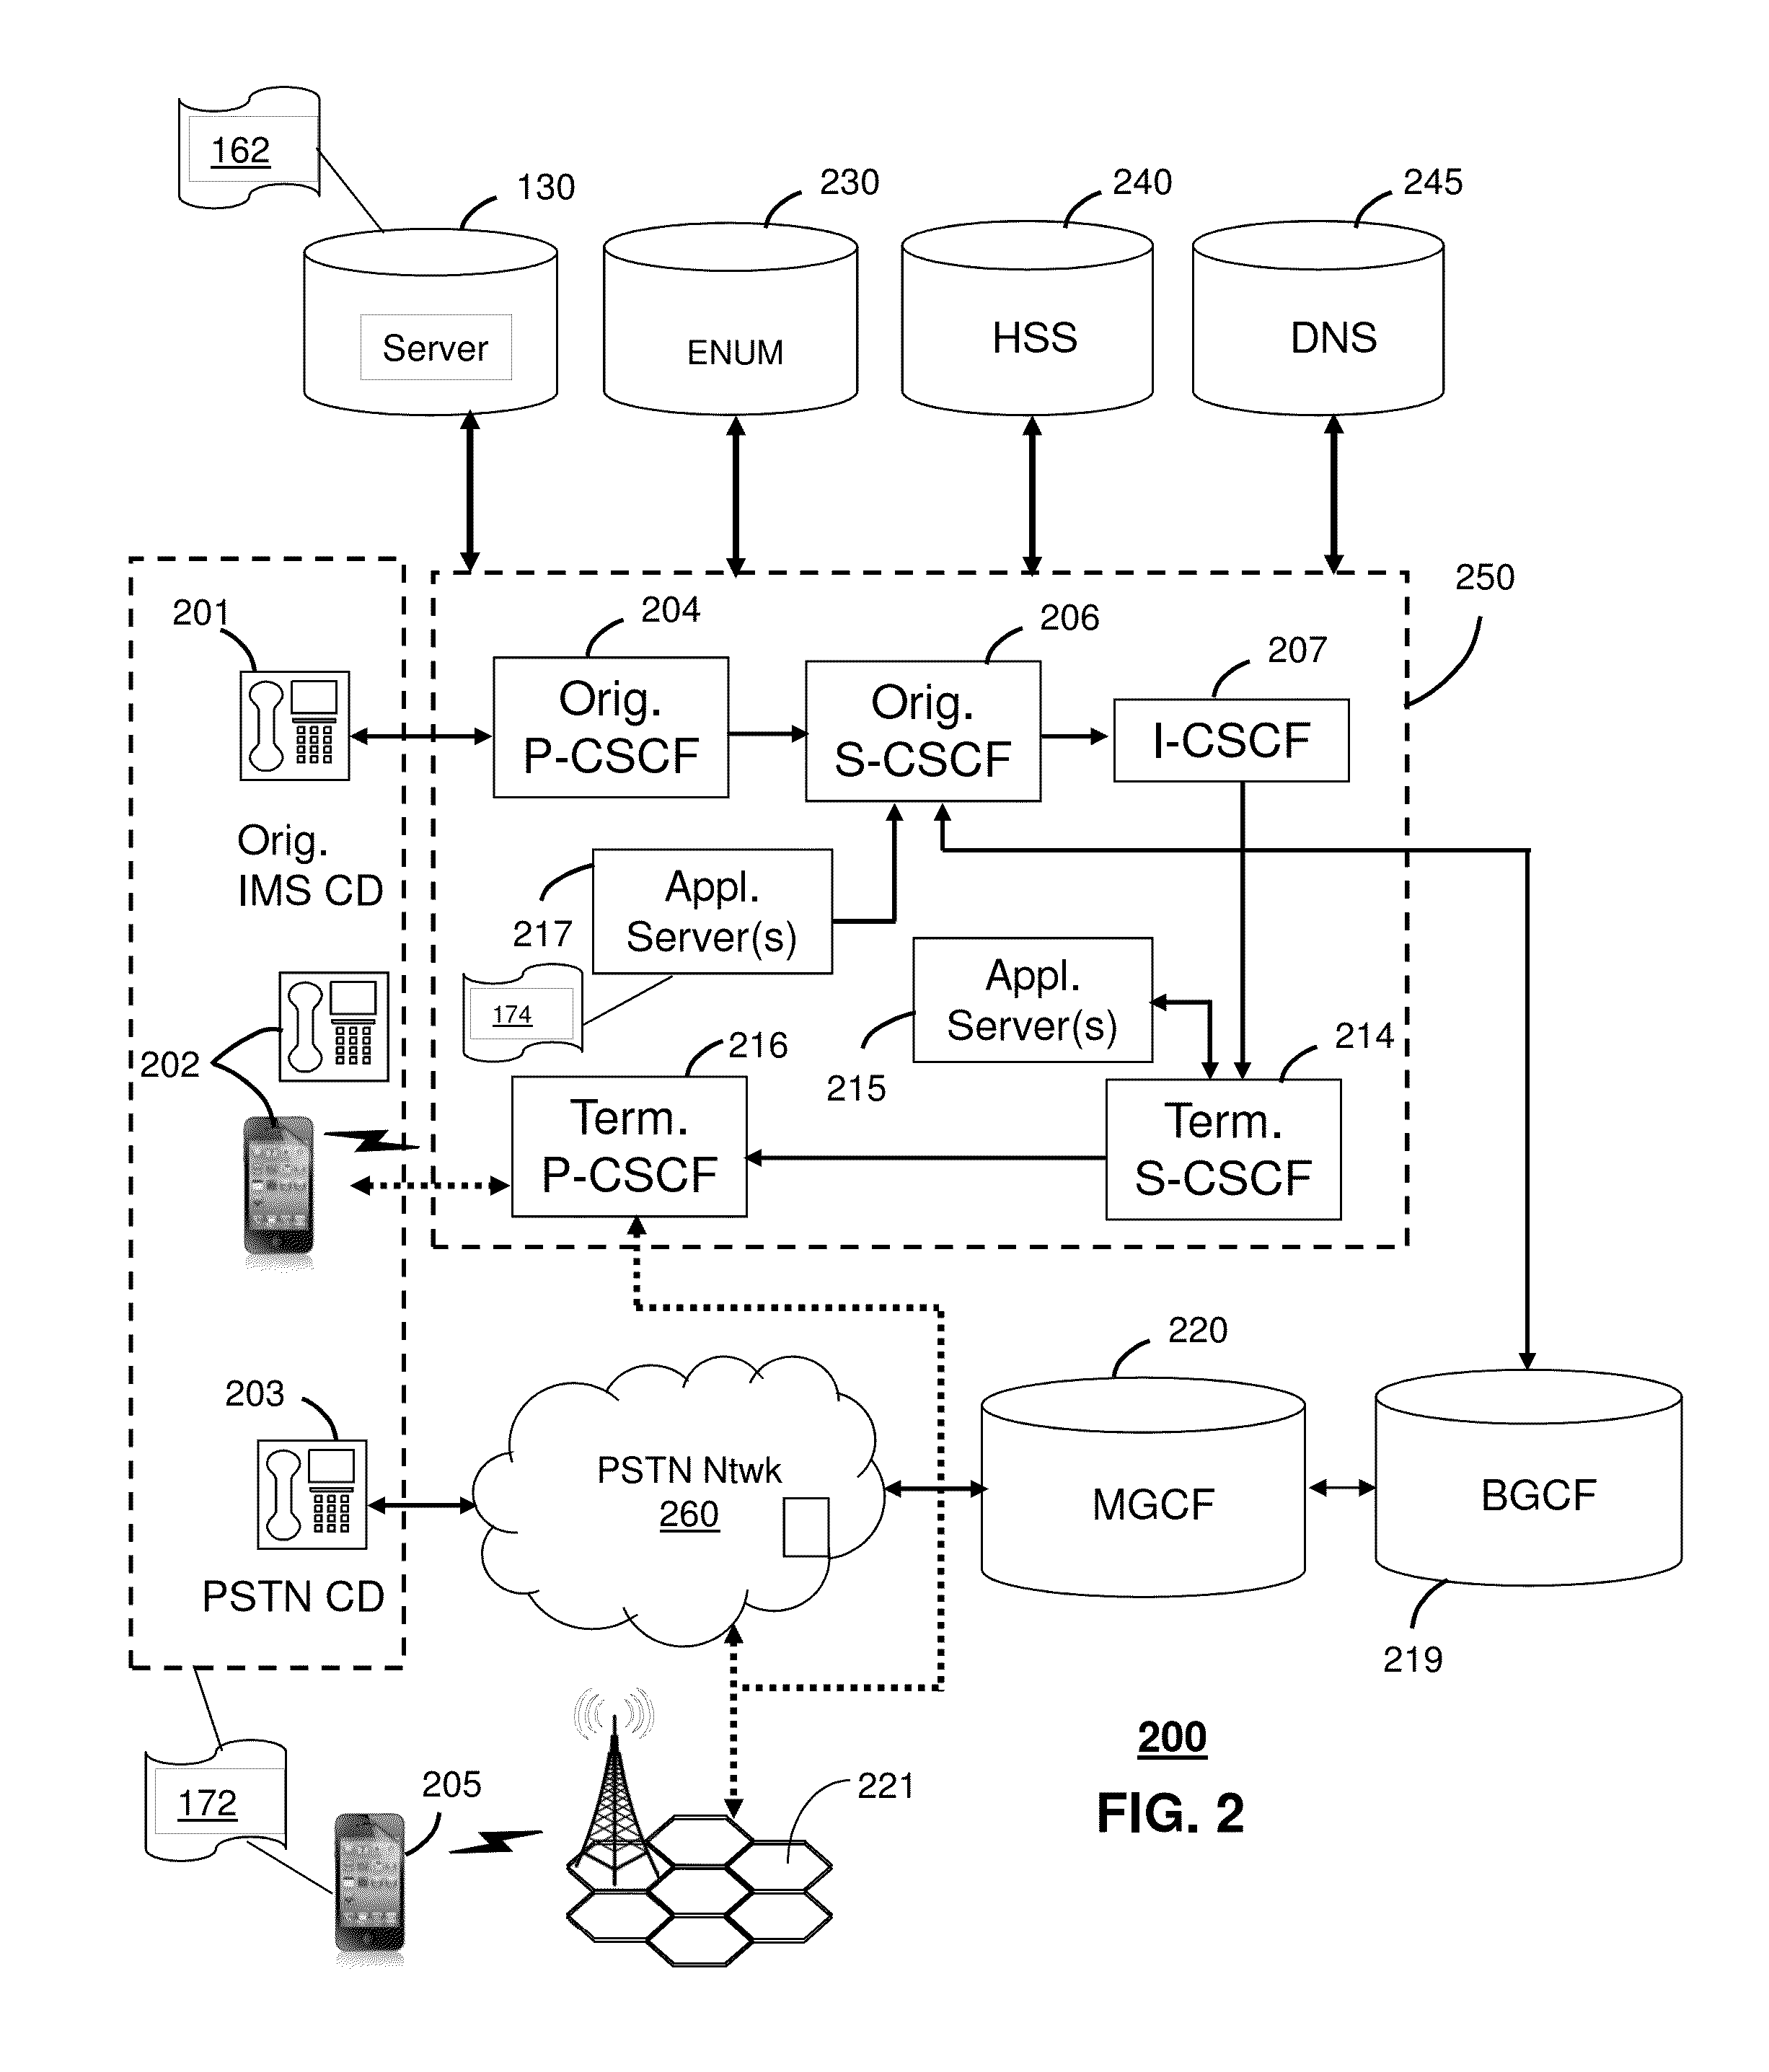 Apparatus and methods for flexible communicatons in a network